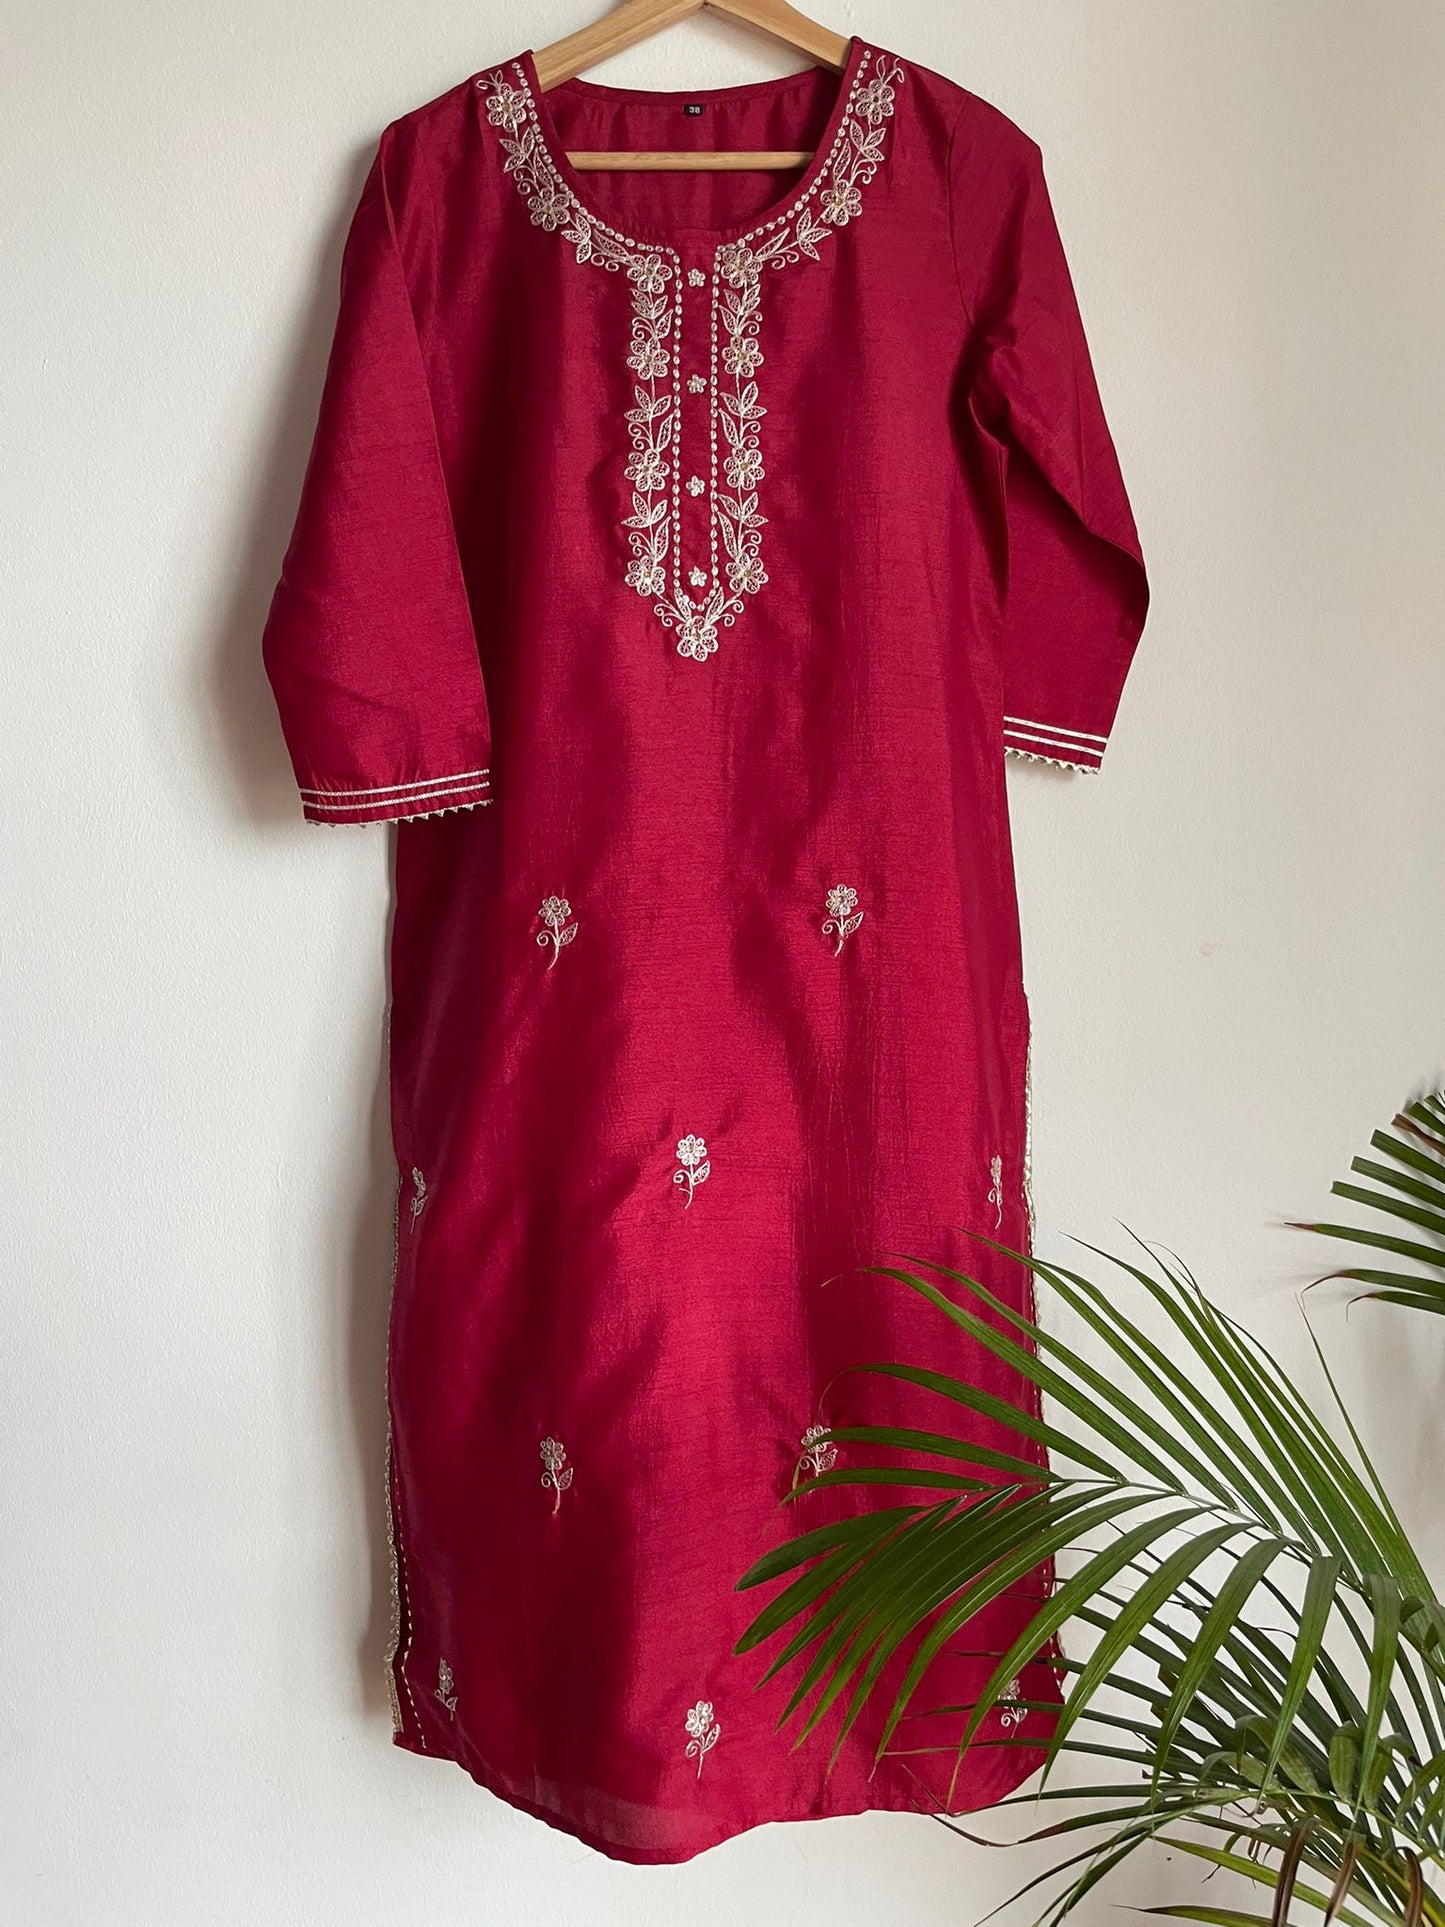 high quality and affordable chanderi silk suit from amaalya for women. Ideal for eid gifting